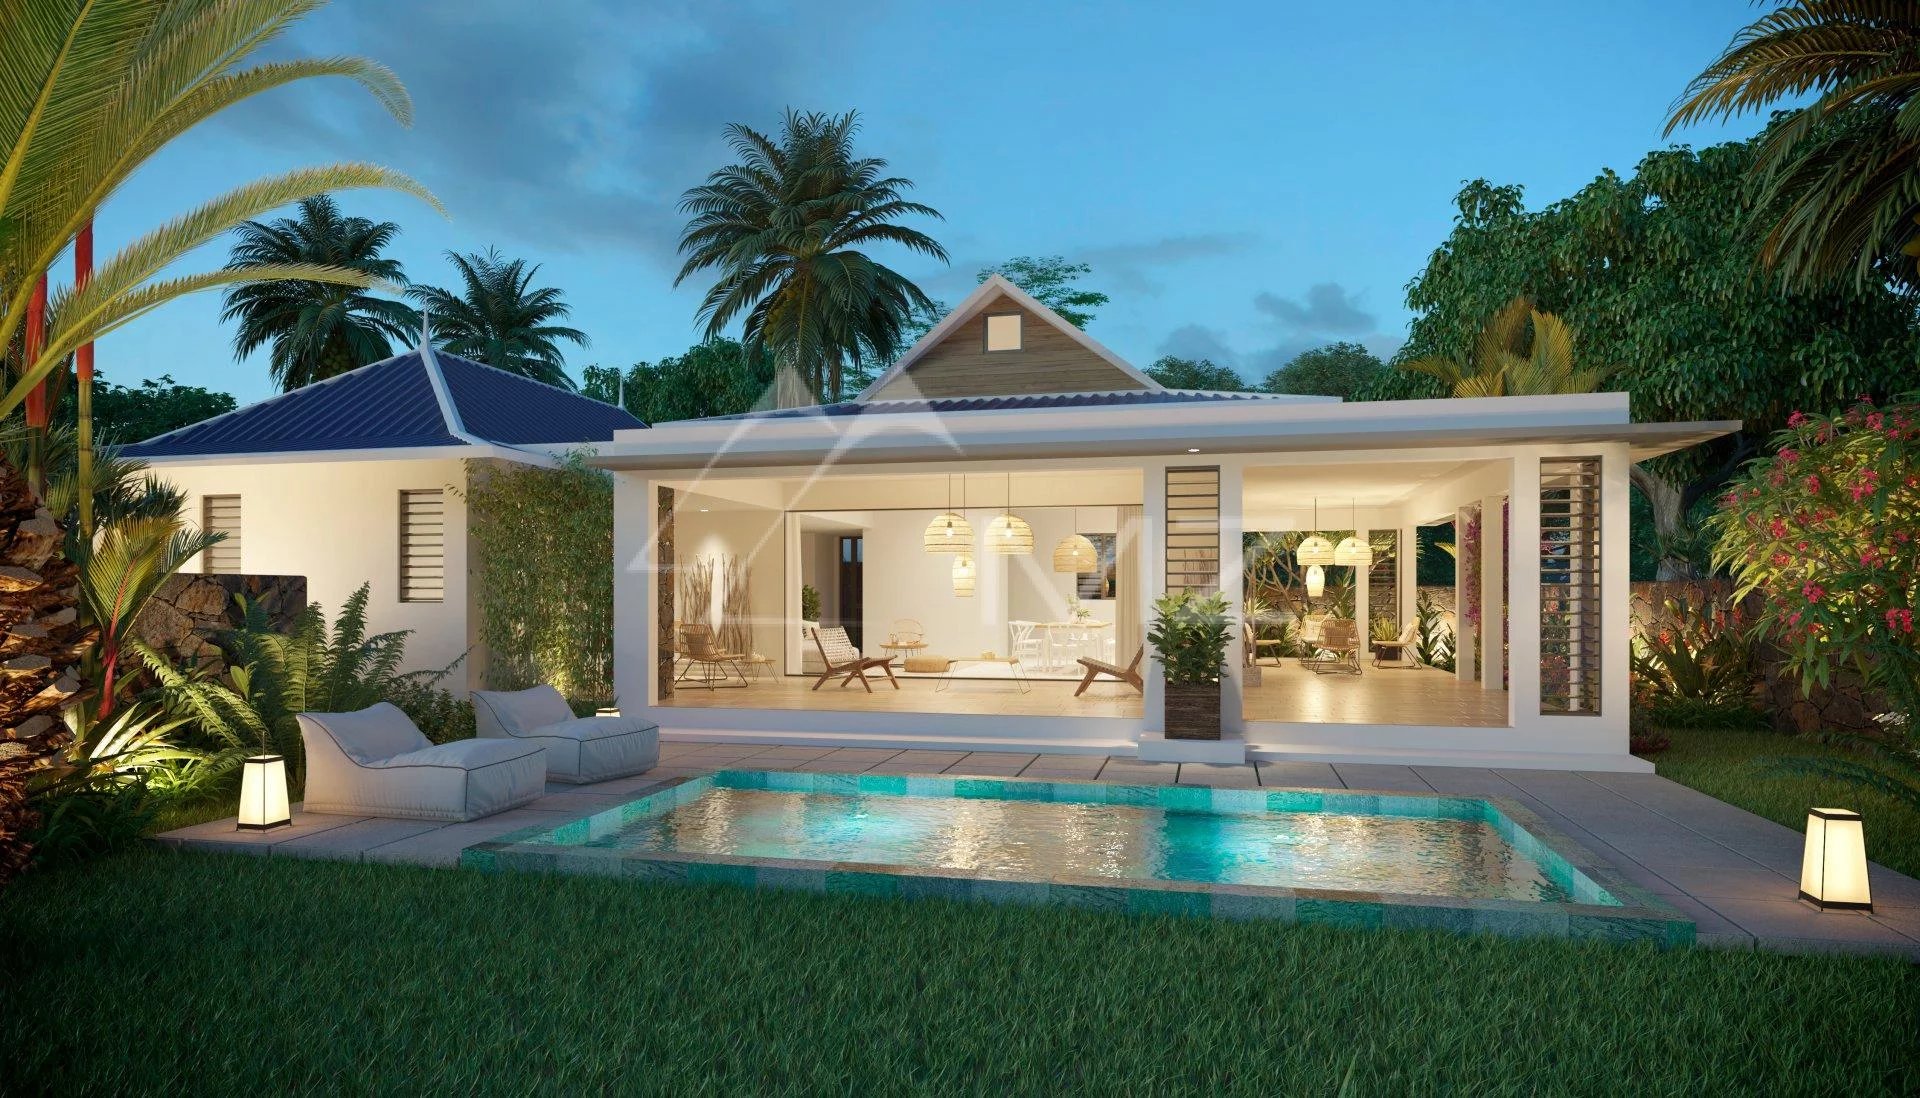 Mauritius - Villa in the heart of tropical nature - Riviere Noire